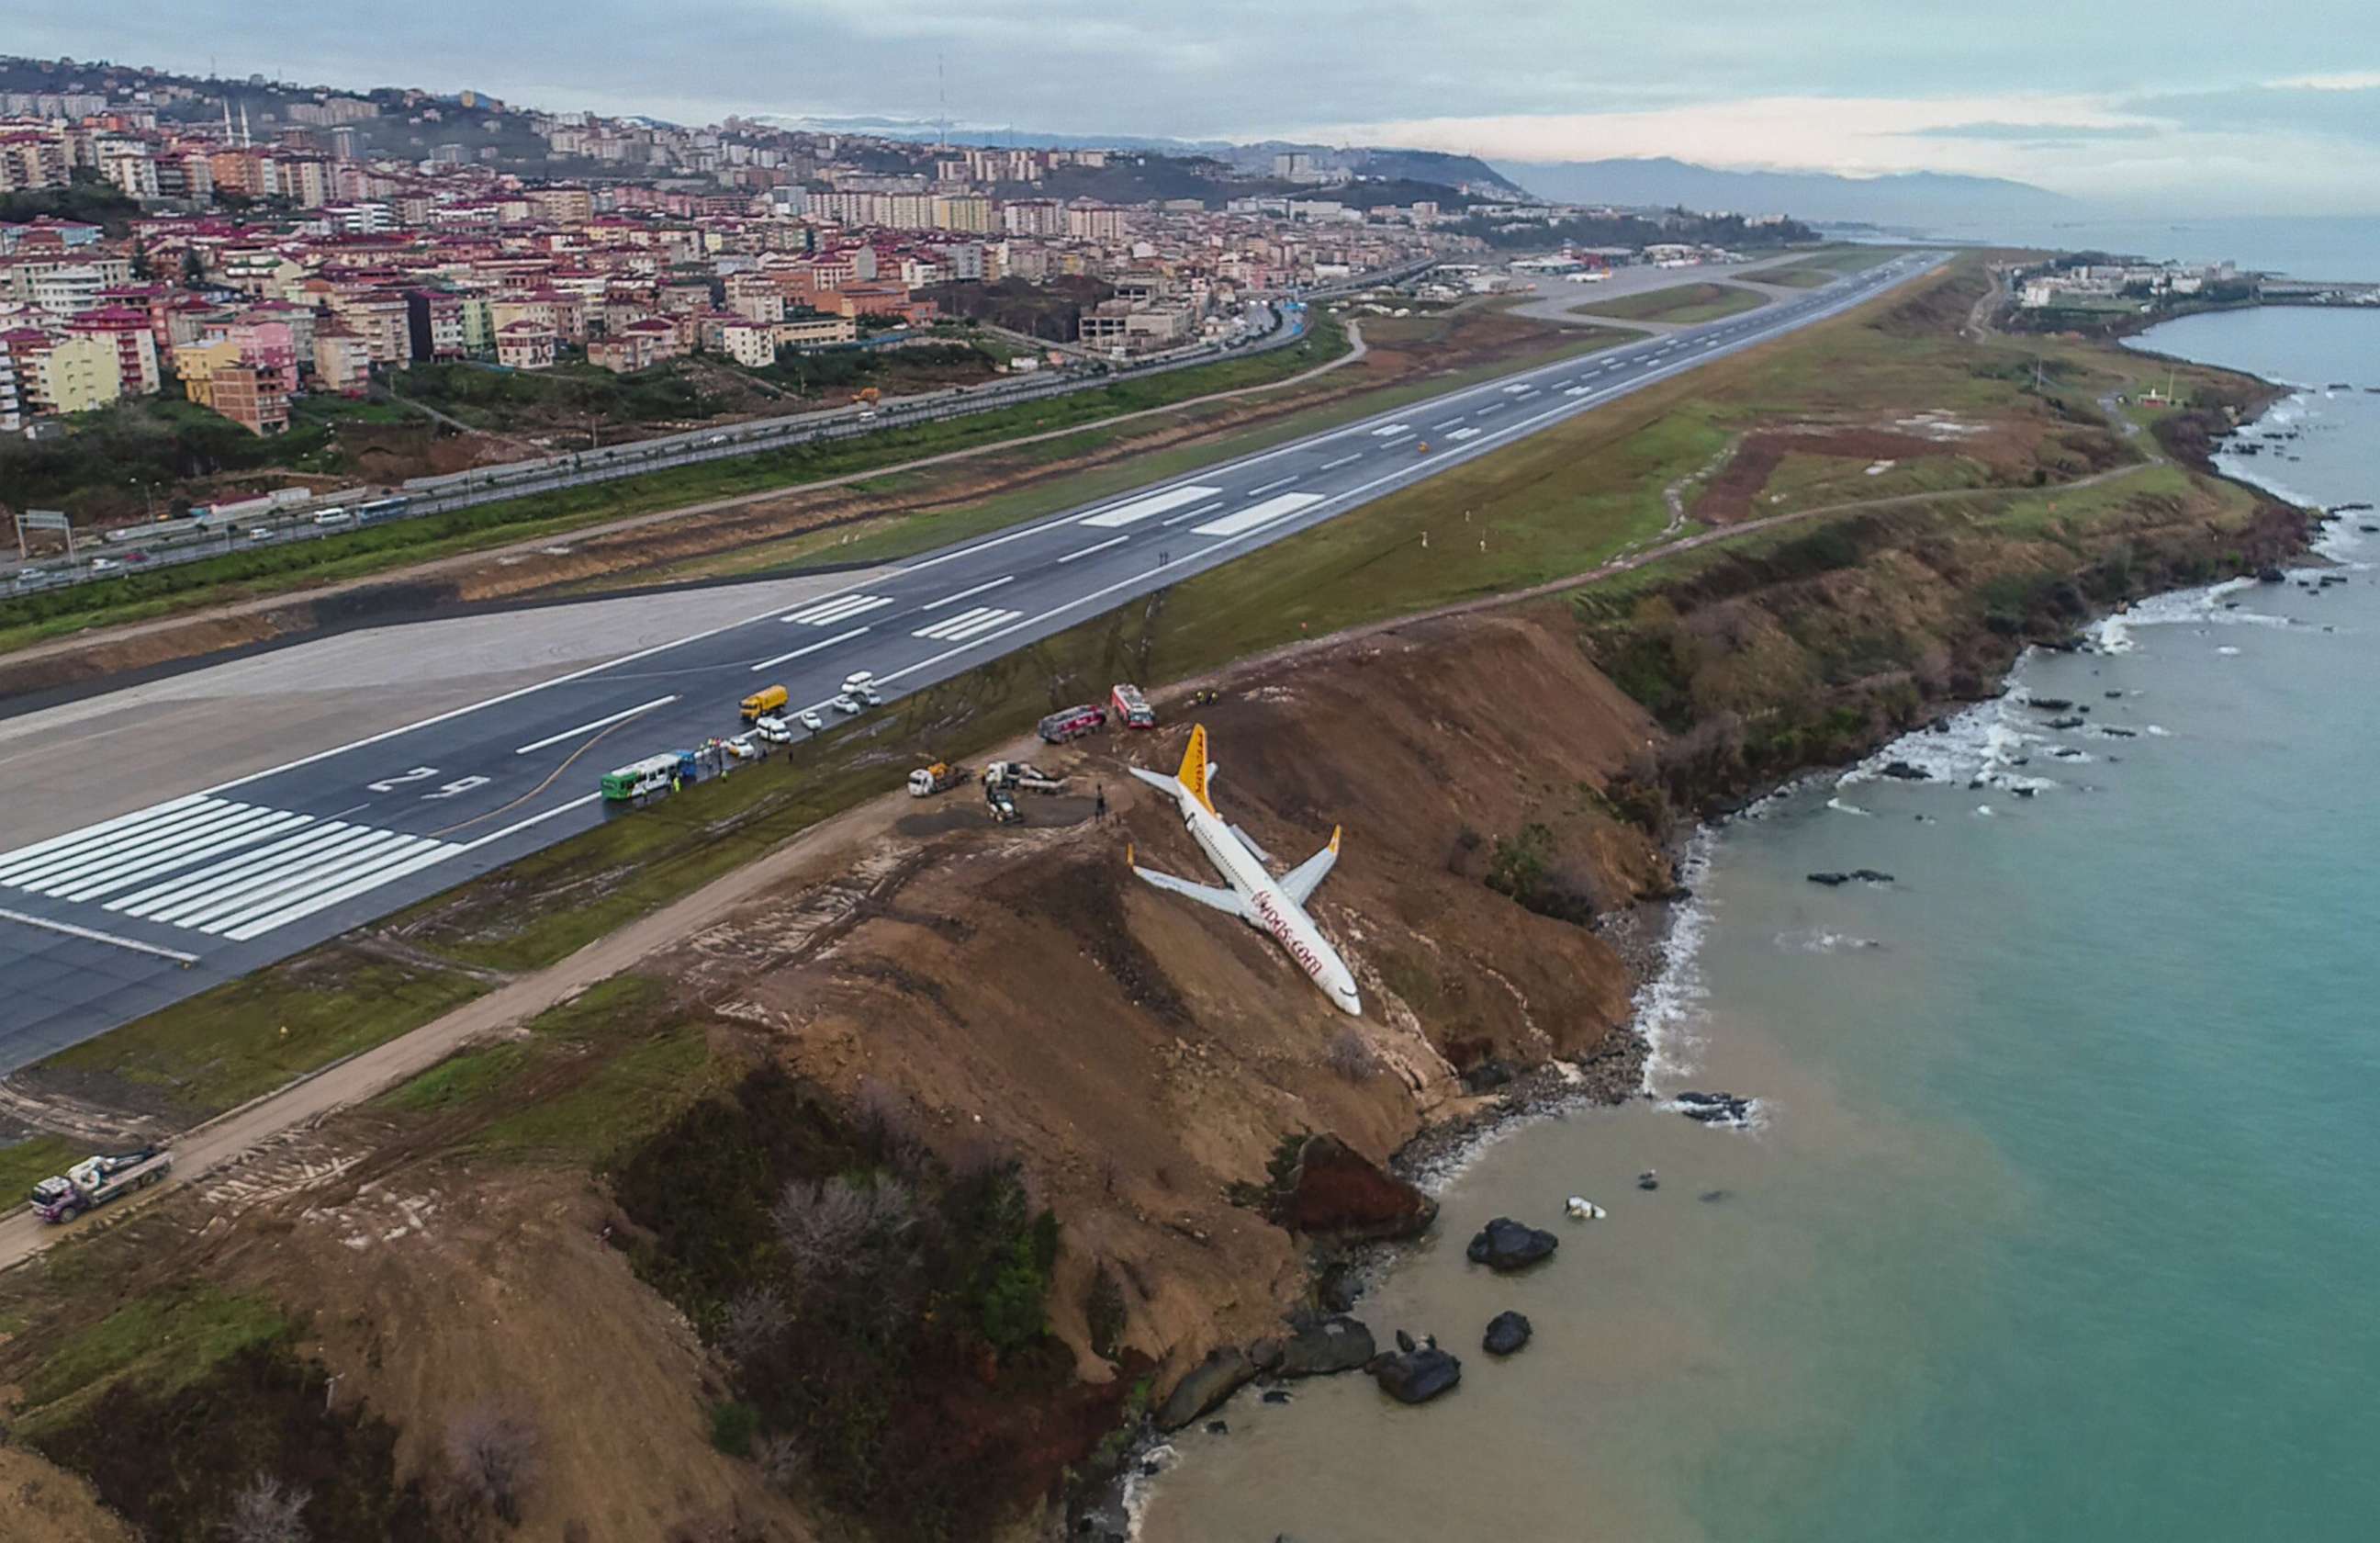 PHOTO: A Pegasus Airlines Boeing 737 passenger plane sits on a cliff after skidding off the runway at Trabzon's airport on the Black Sea coast in Turkey, Jan. 14, 2018.